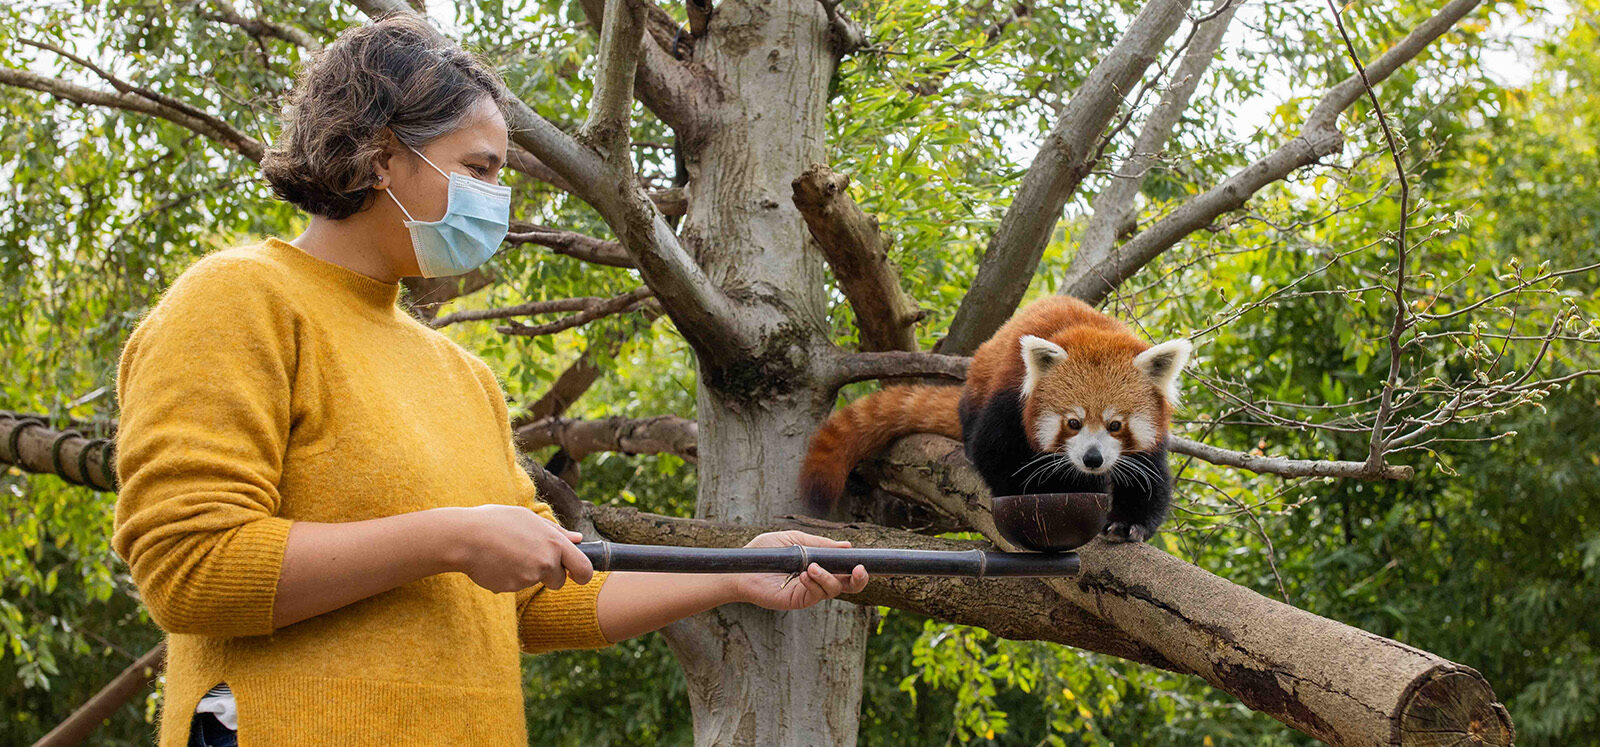 Woman in a yellow jumper holding feeding tool out to Red Panda perched in a lush green tree